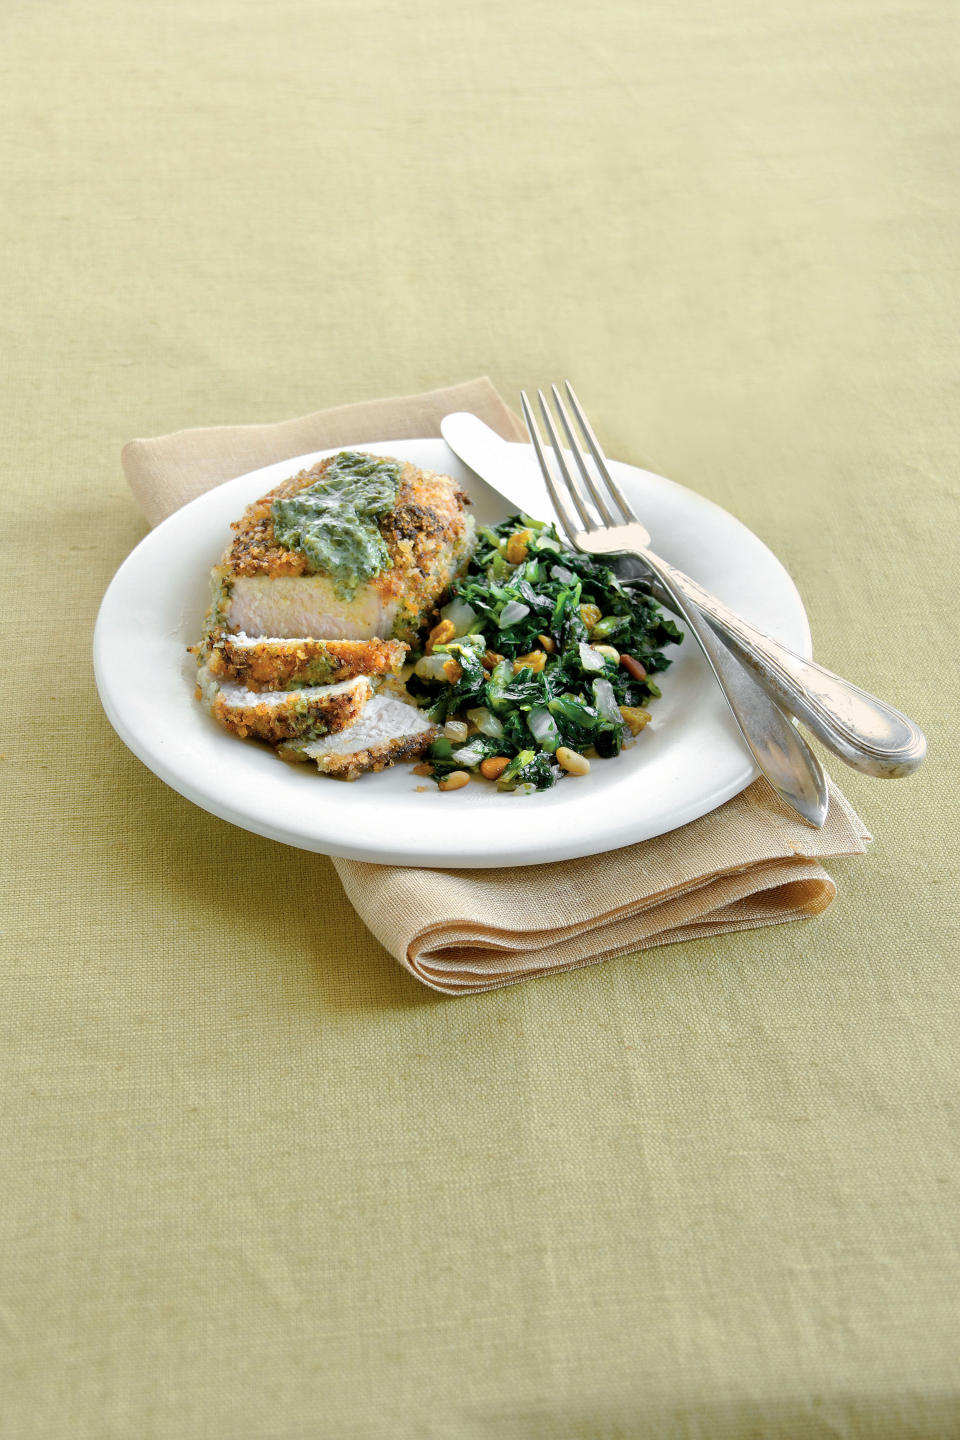 Pesto-Crusted Pork Chops with Sweet-and-Sour Collards